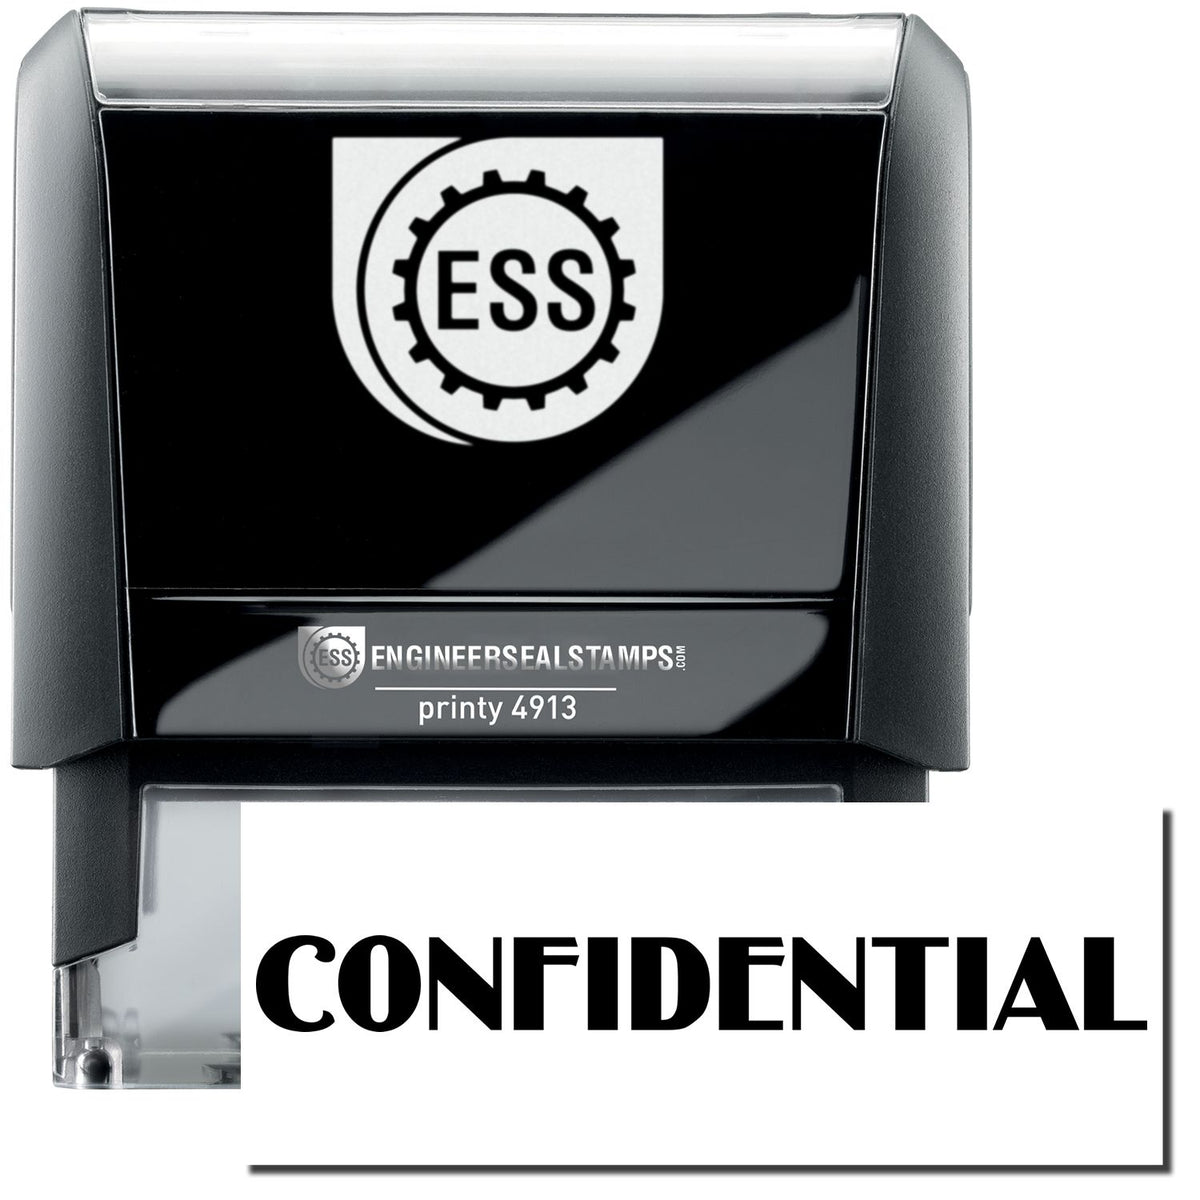 A self-inking stamp with a stamped image showing how the text &quot;CONFIDENTIAL&quot; in a large optima font is displayed by it after stamping.